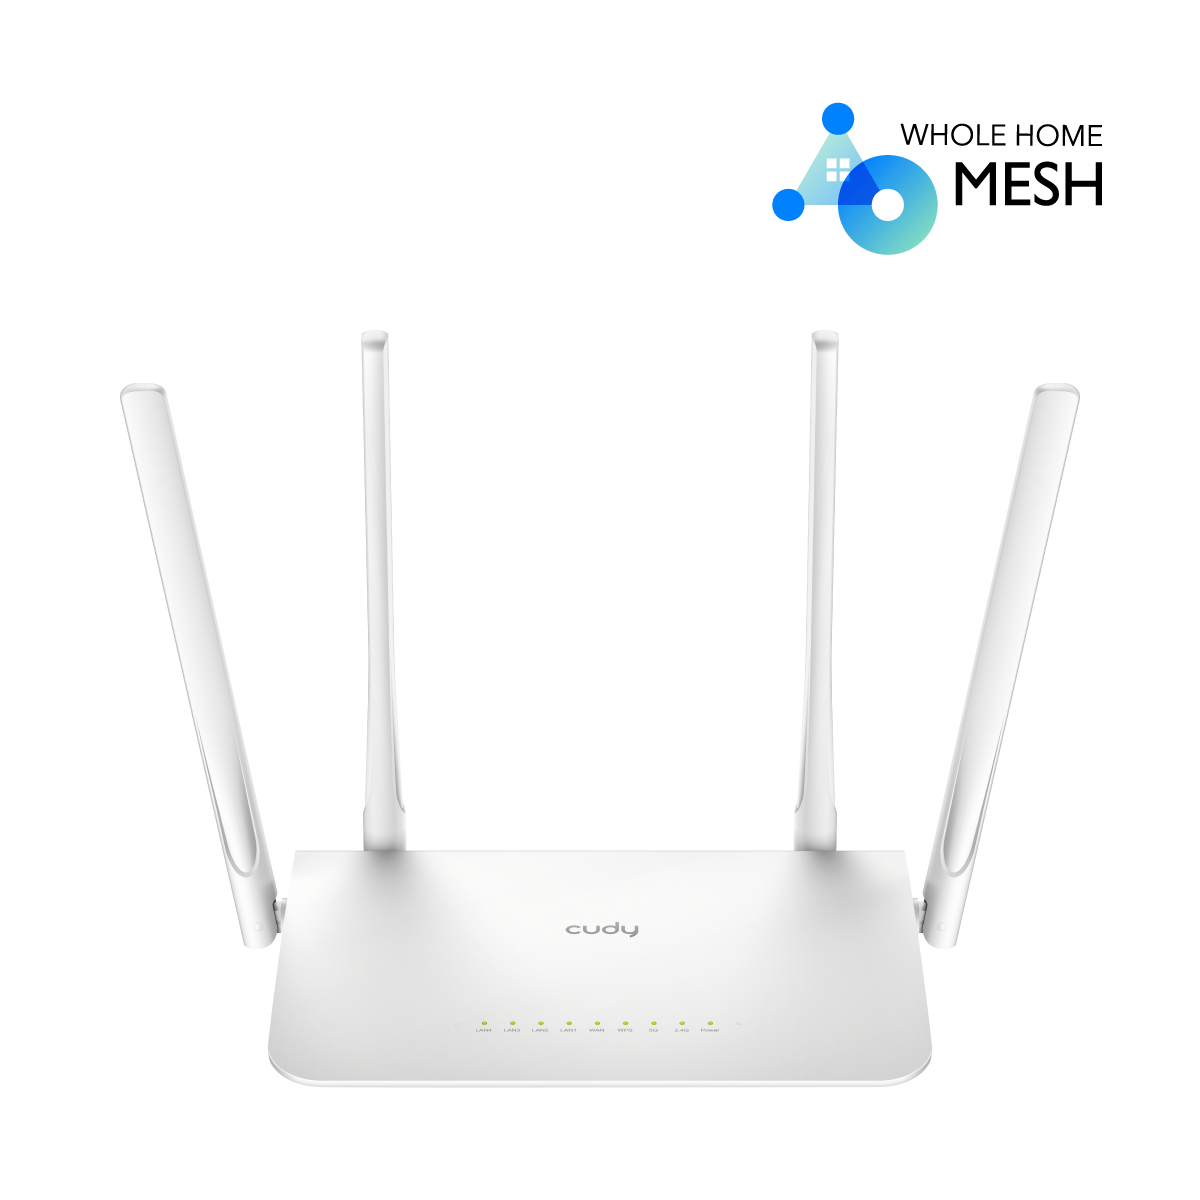 4G LTE AC1200 Dual Band Wi-Fi Router, Model: LT500-Cudy: WiFi, 4G, and 5G  Equipments and Solutions